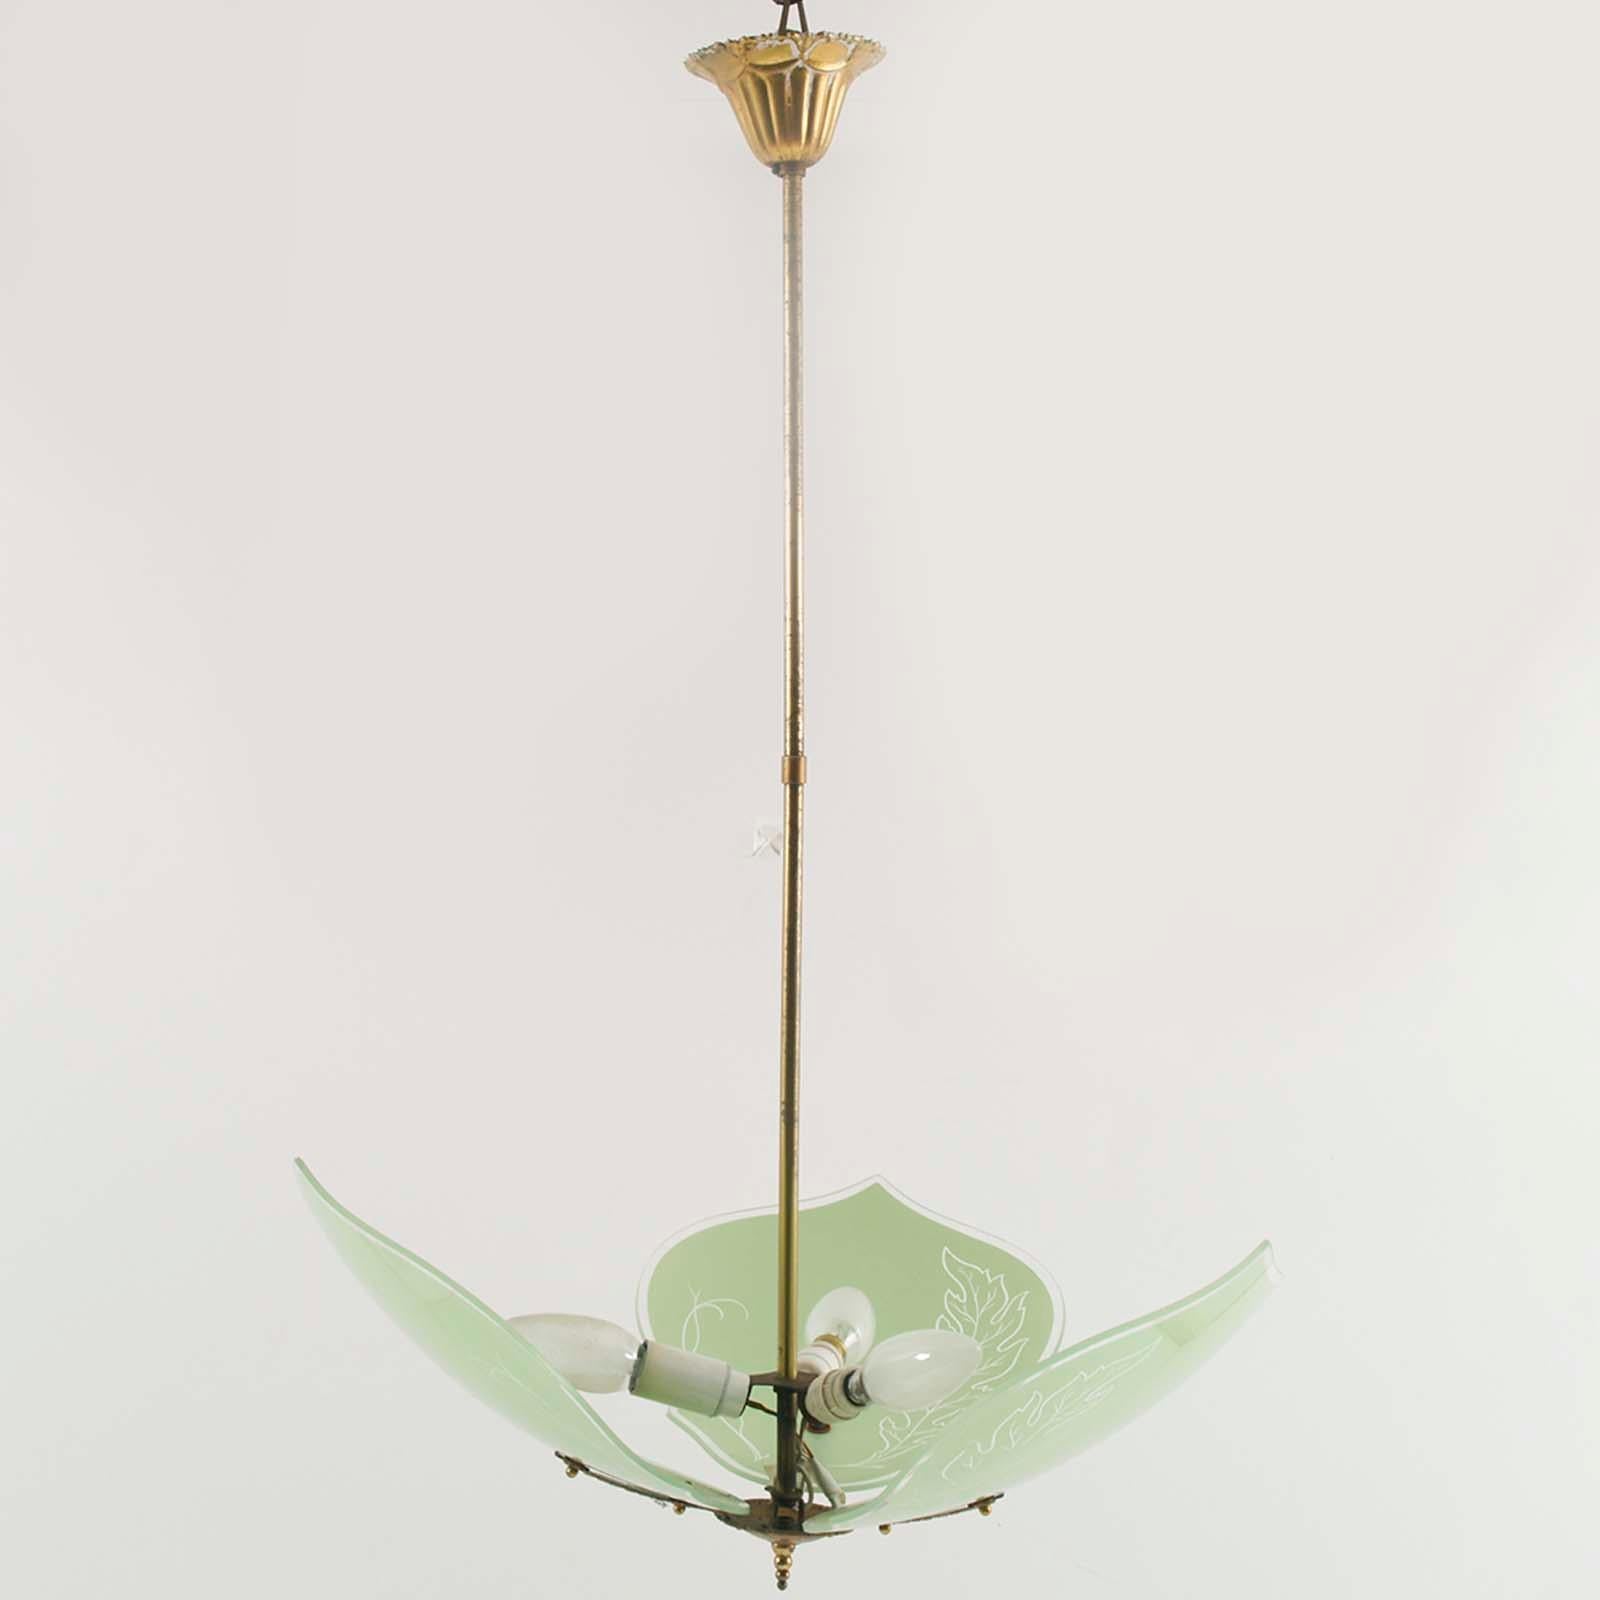 1920s Refined three-light Art Deco chandelier, with three leaves in green colored Murano glass
The good and correct functioning of the electrical system has been checked.

About Pauly & C. - Compagnia Venezia Murano
Pauly & C. - Compagnia Venezia